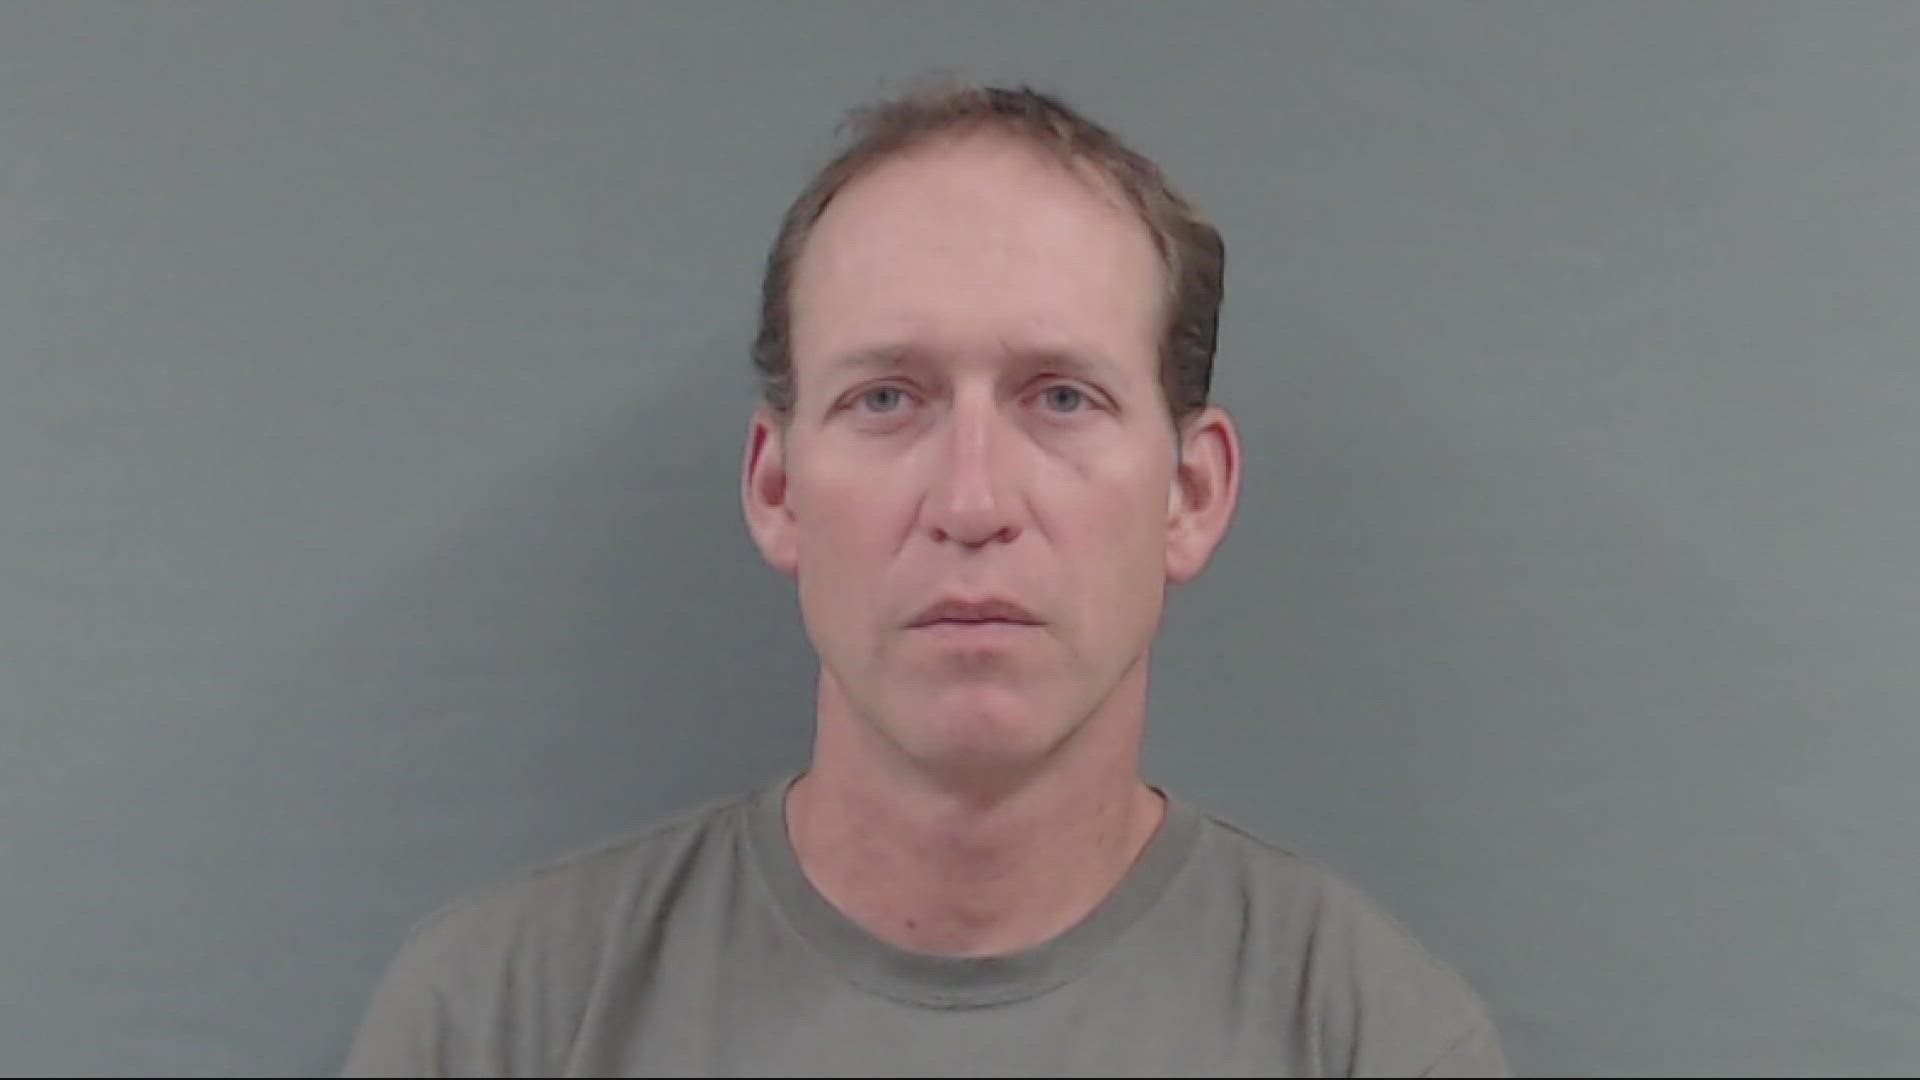 The soccer coach is accused of trying to record a 12-year-old girl changing in his bathroom, and police say there may be more victims.